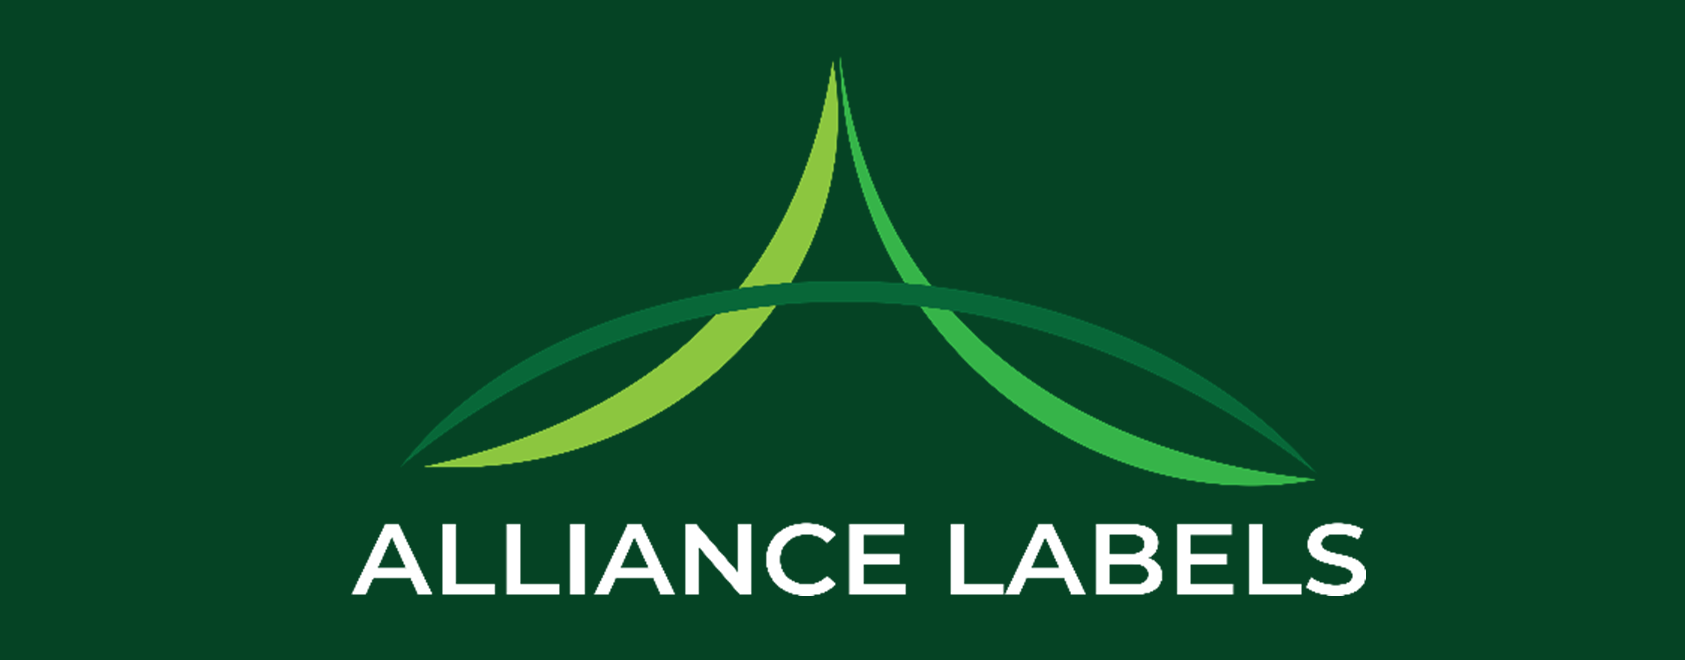 Alliance Labels Launches Rebranded Logo and Website